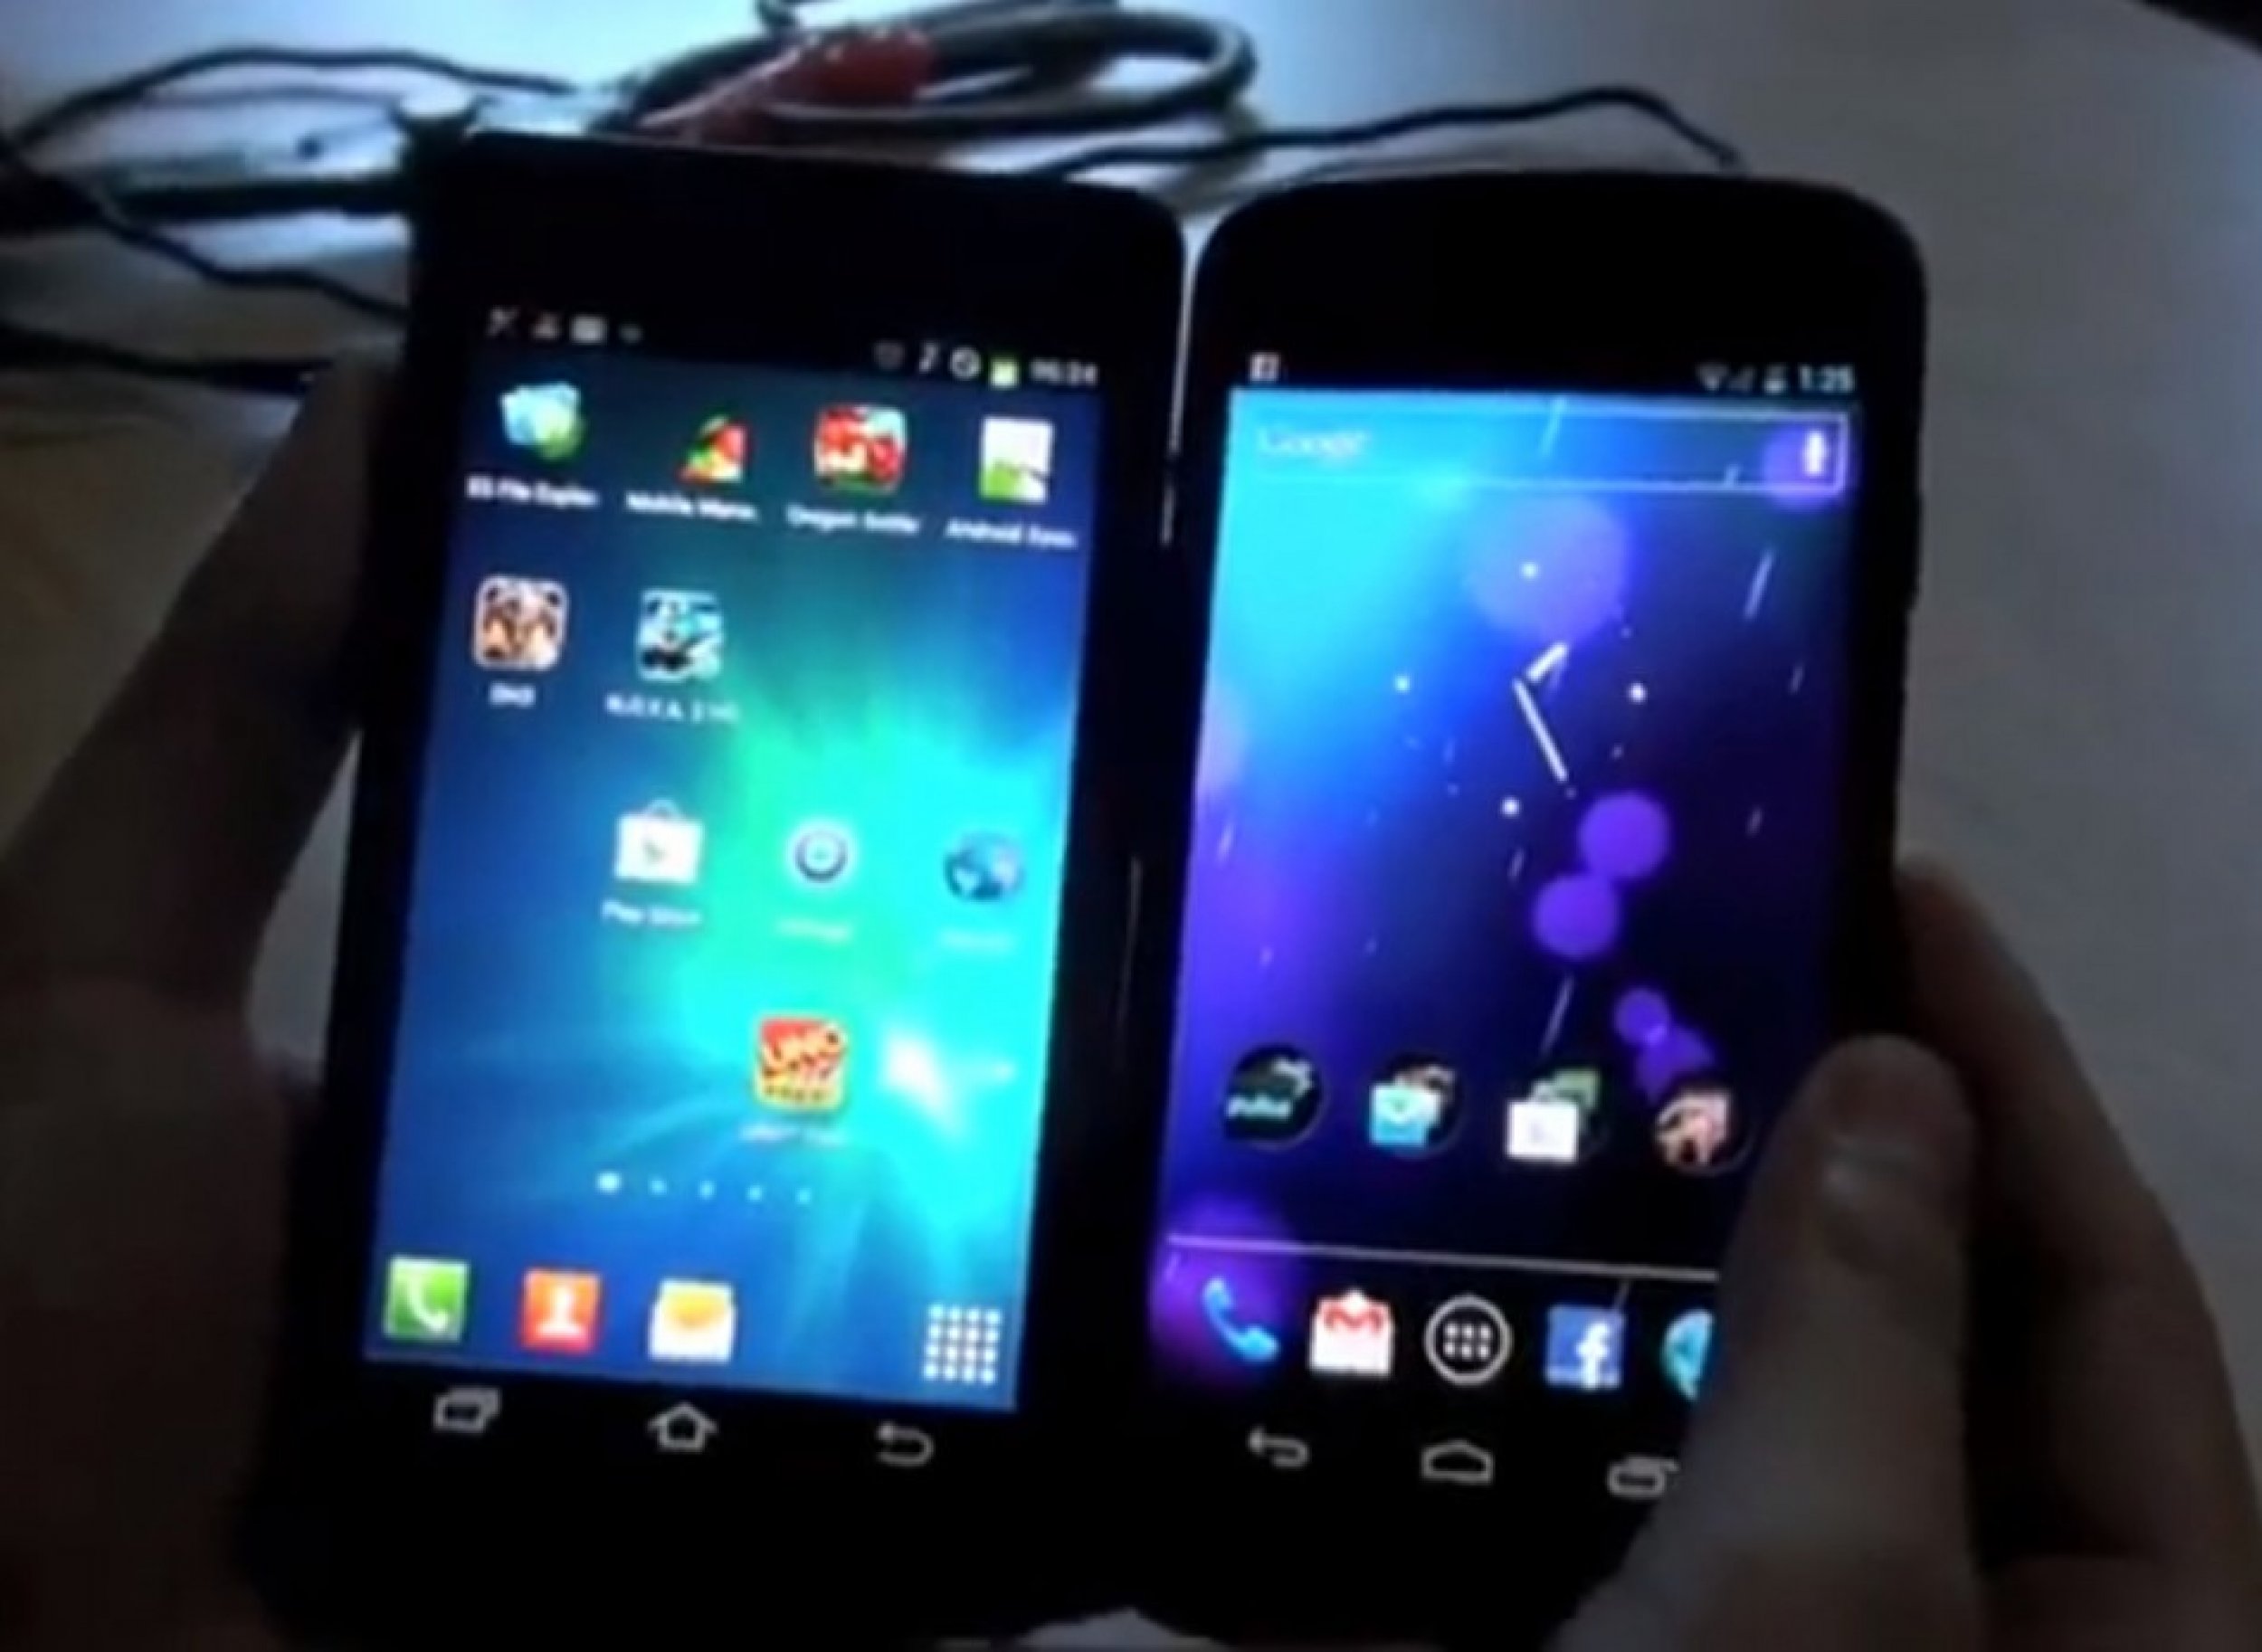 Samsung Galaxy S3 - Compared with S2